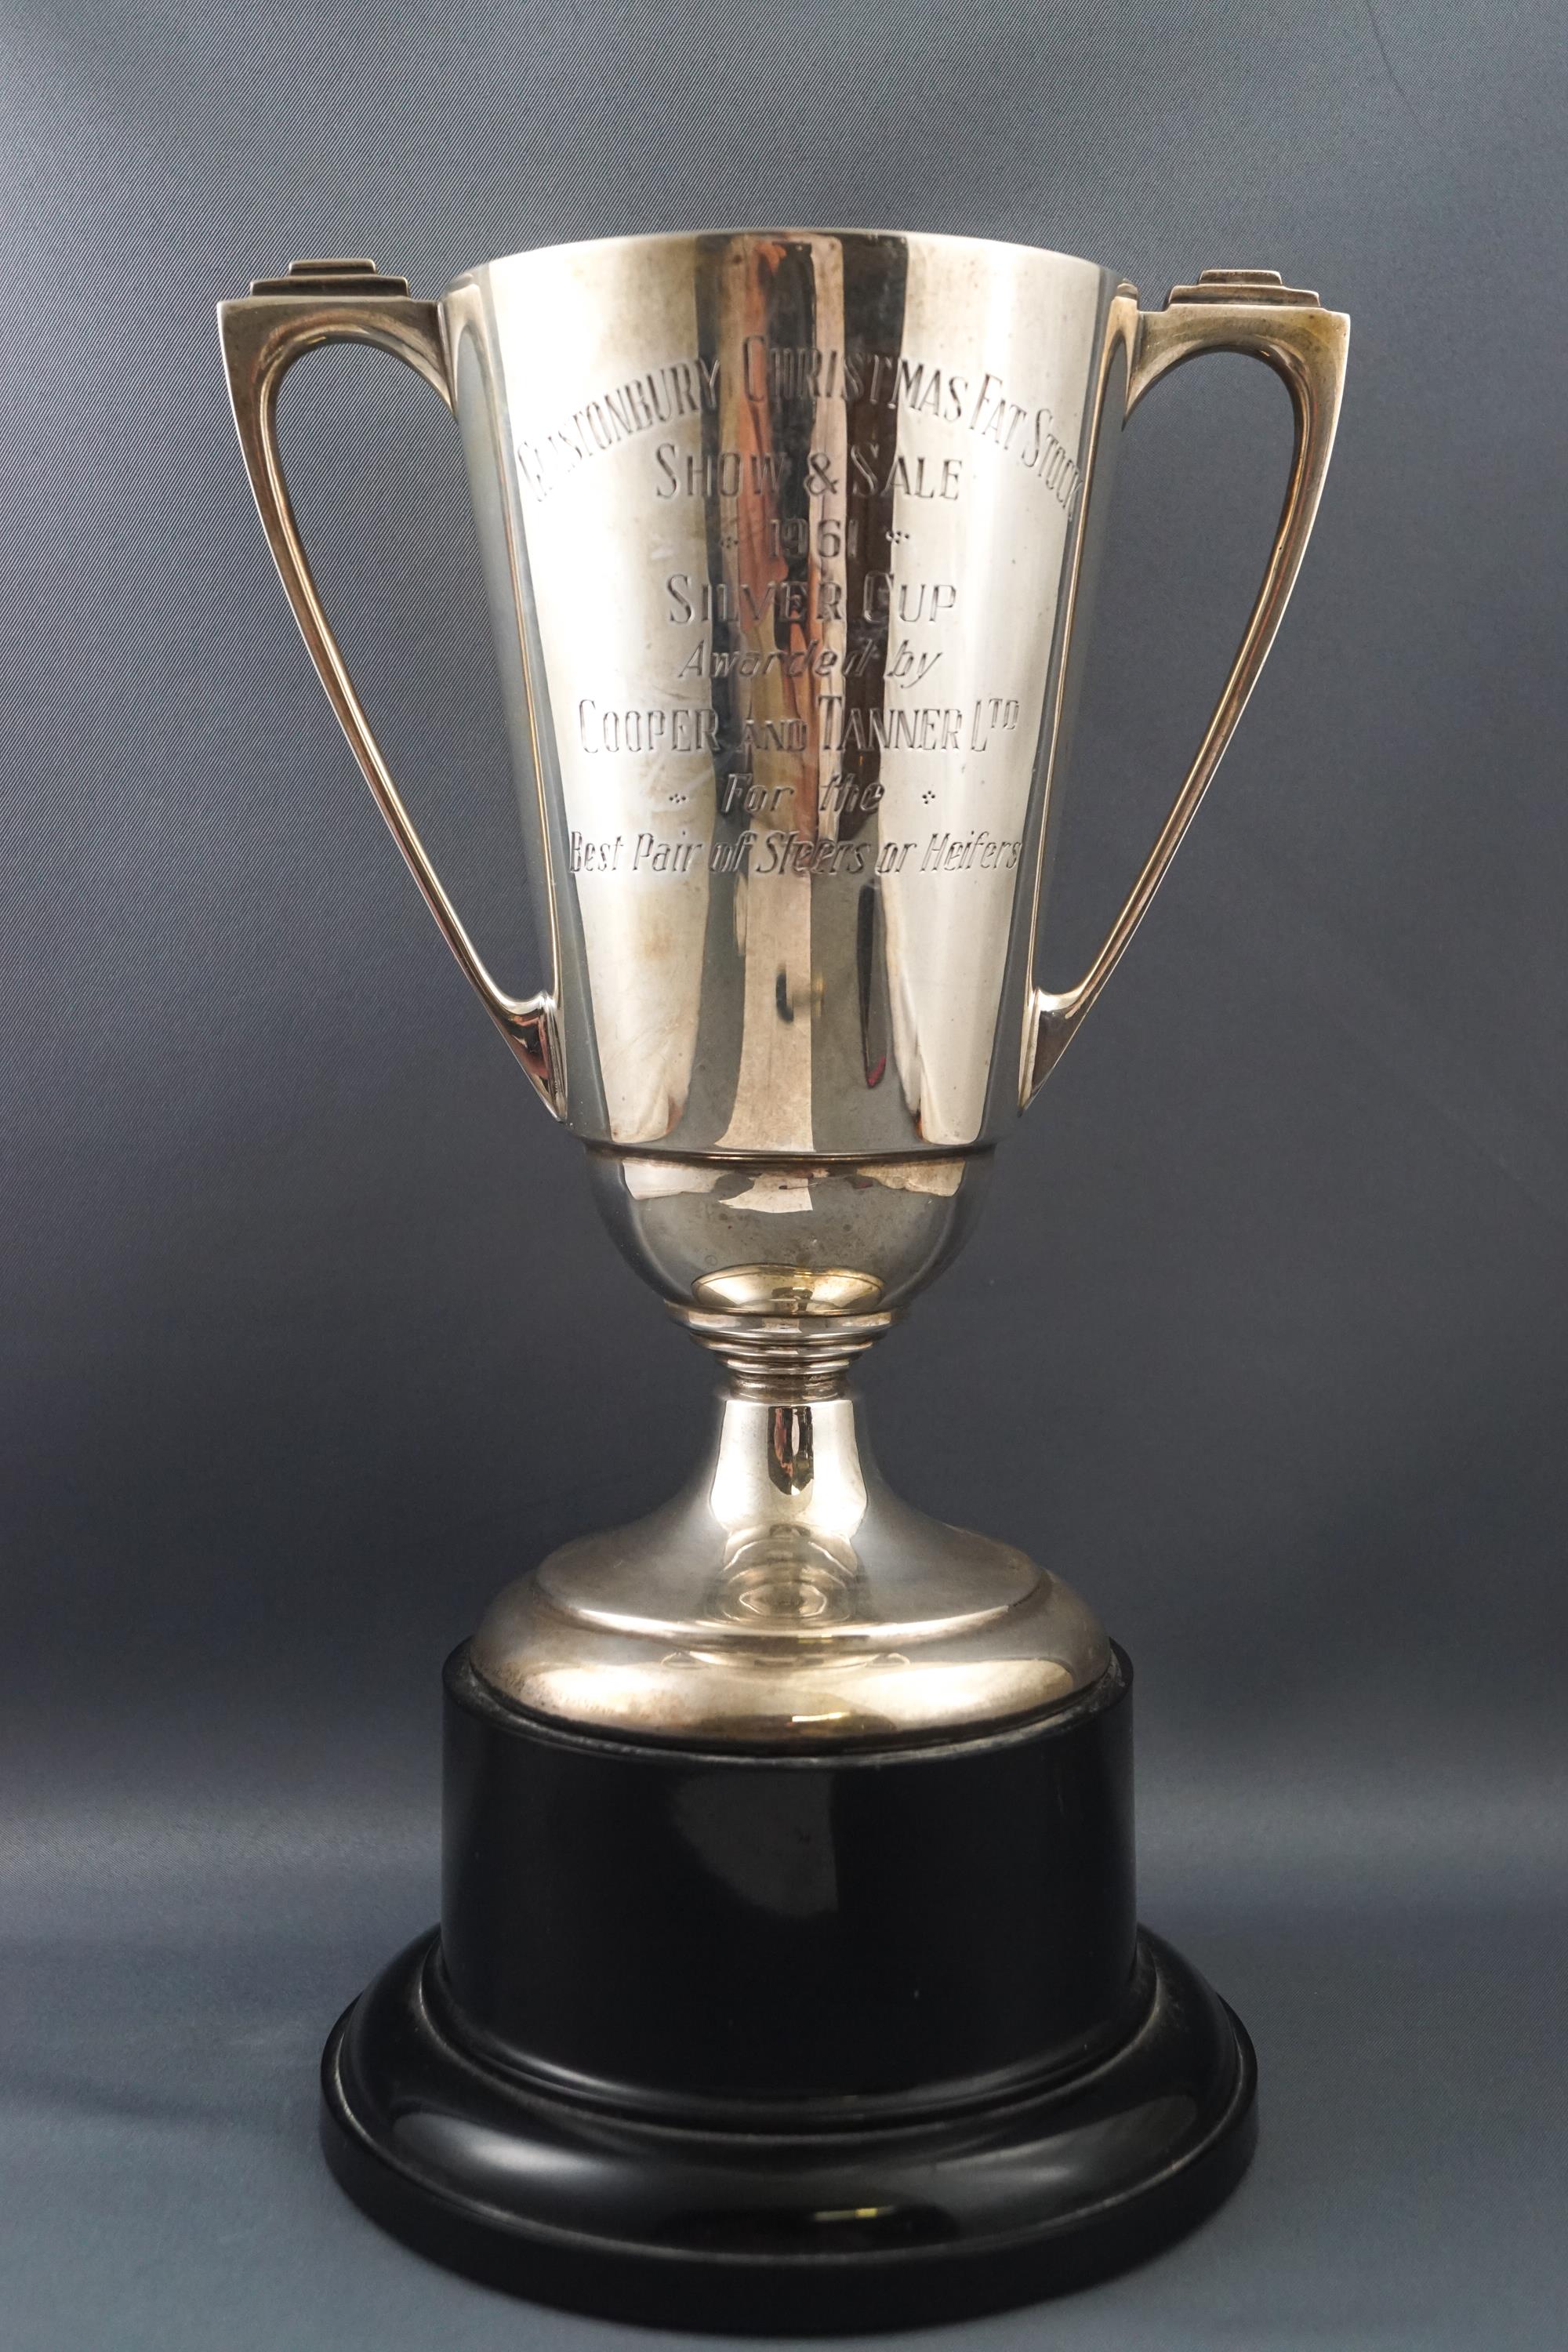 An Art Deco Glastonbury Christmas Fat Stock Show and Sale two handled trophy cup, dated 1961, 17.